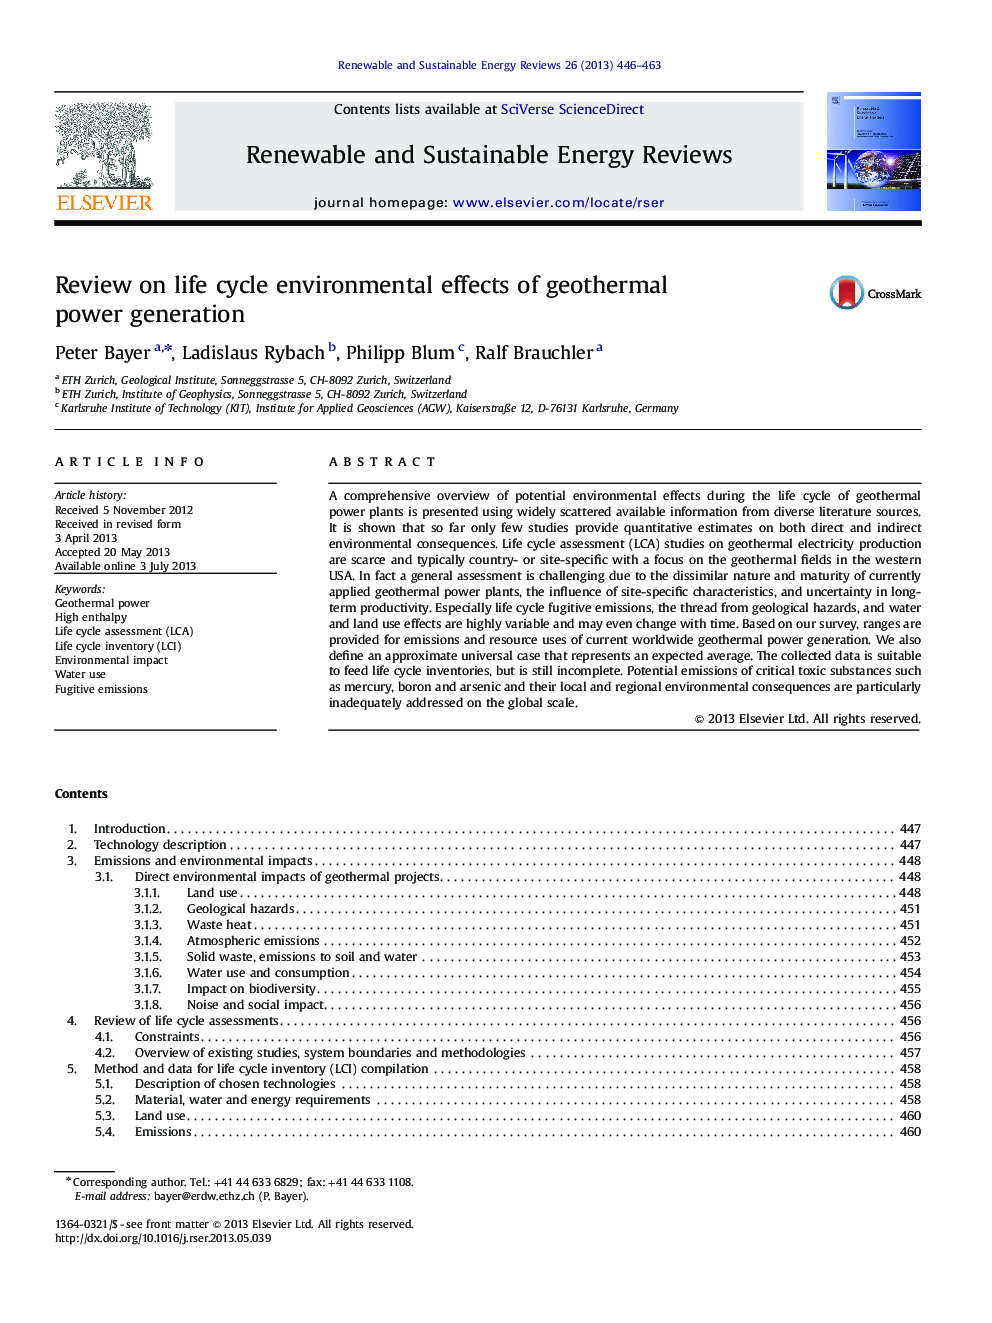 Review on life cycle environmental effects of geothermal power generation